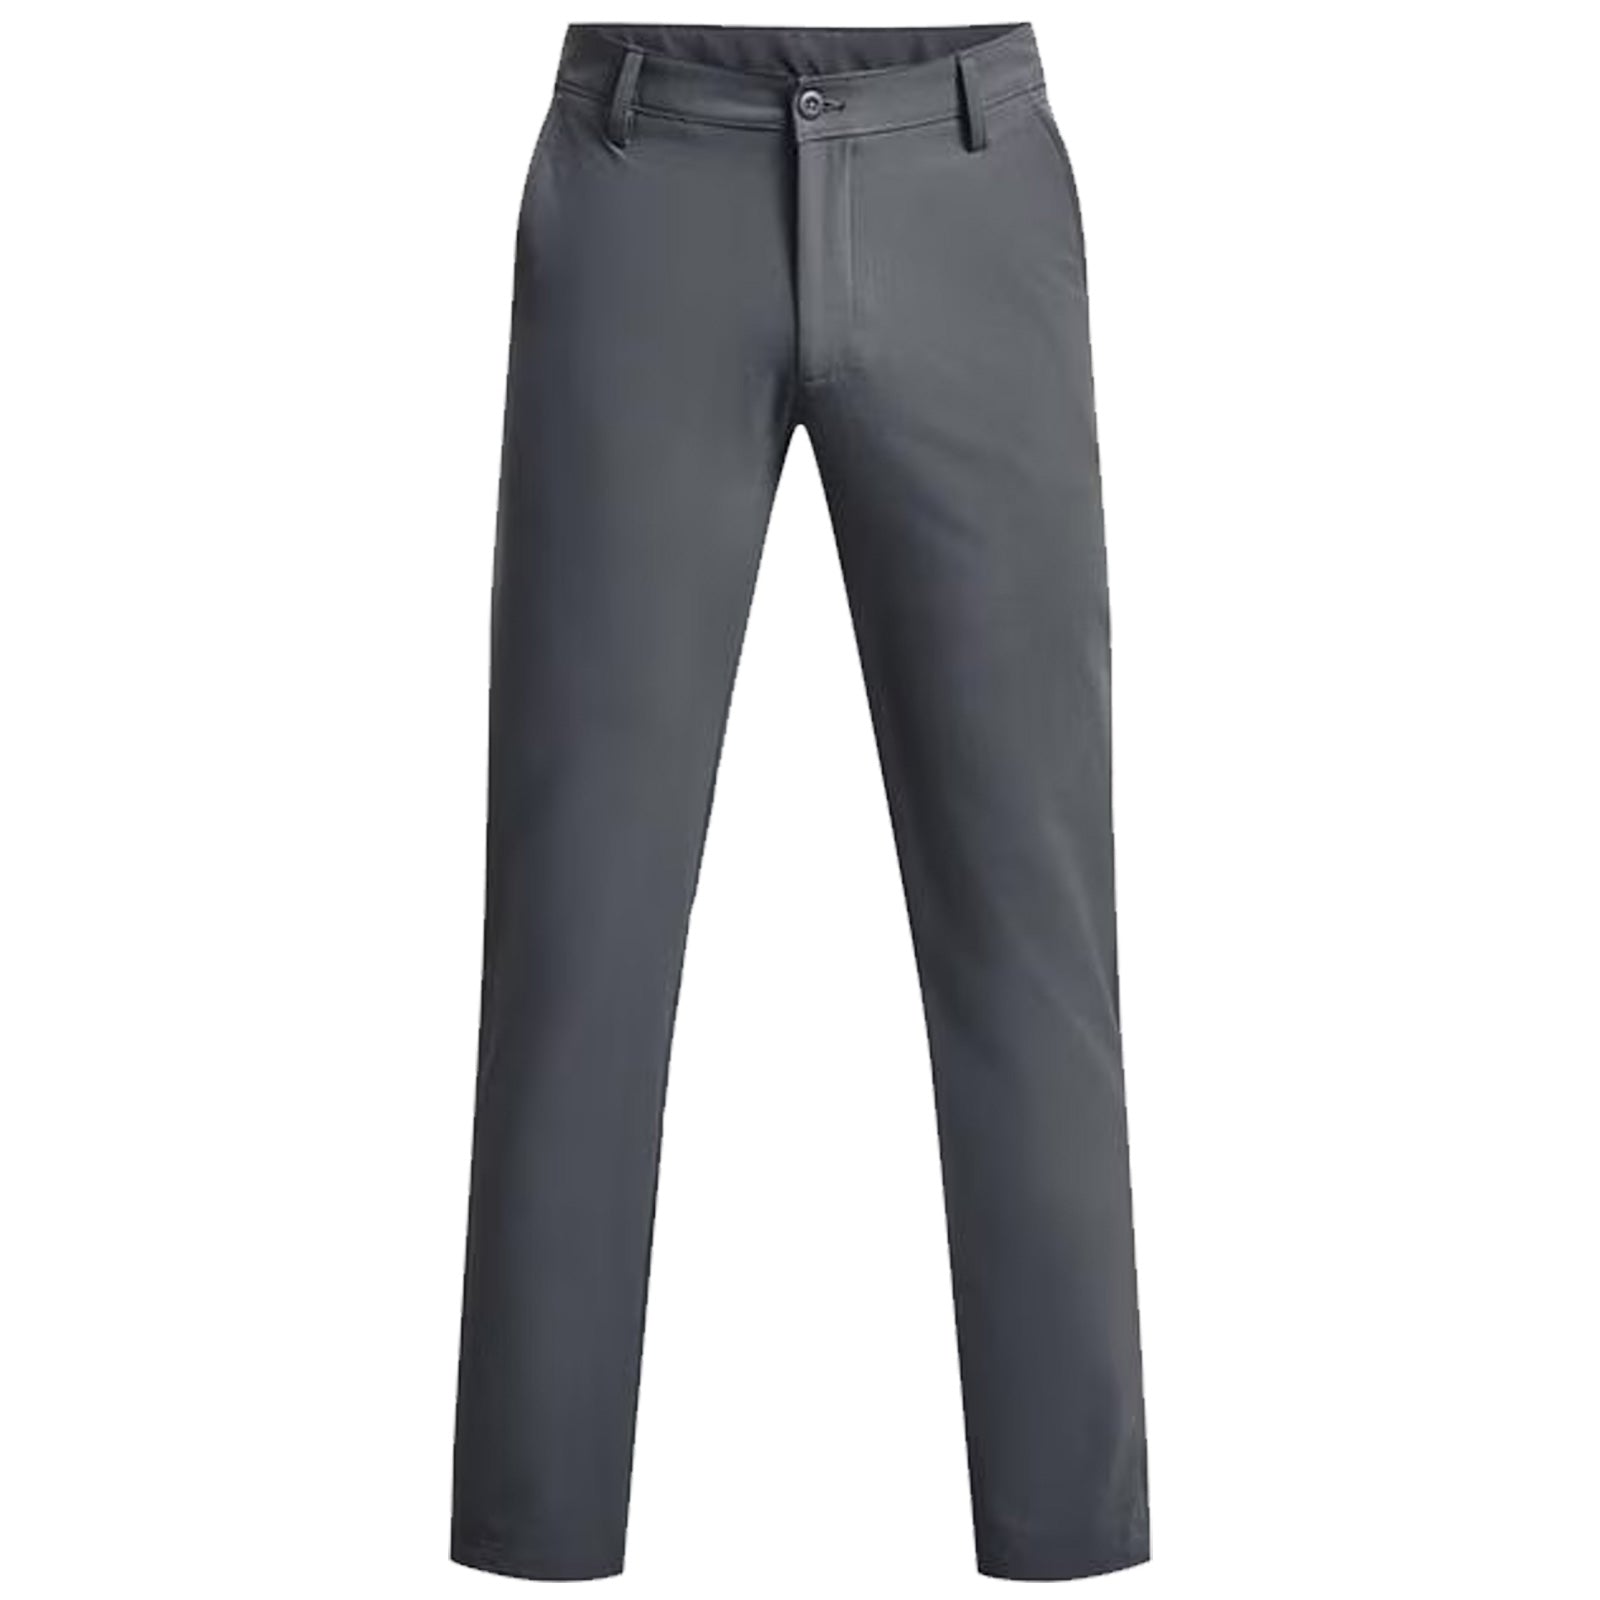 Under Armour Mens Matchplay Tapered Trousers